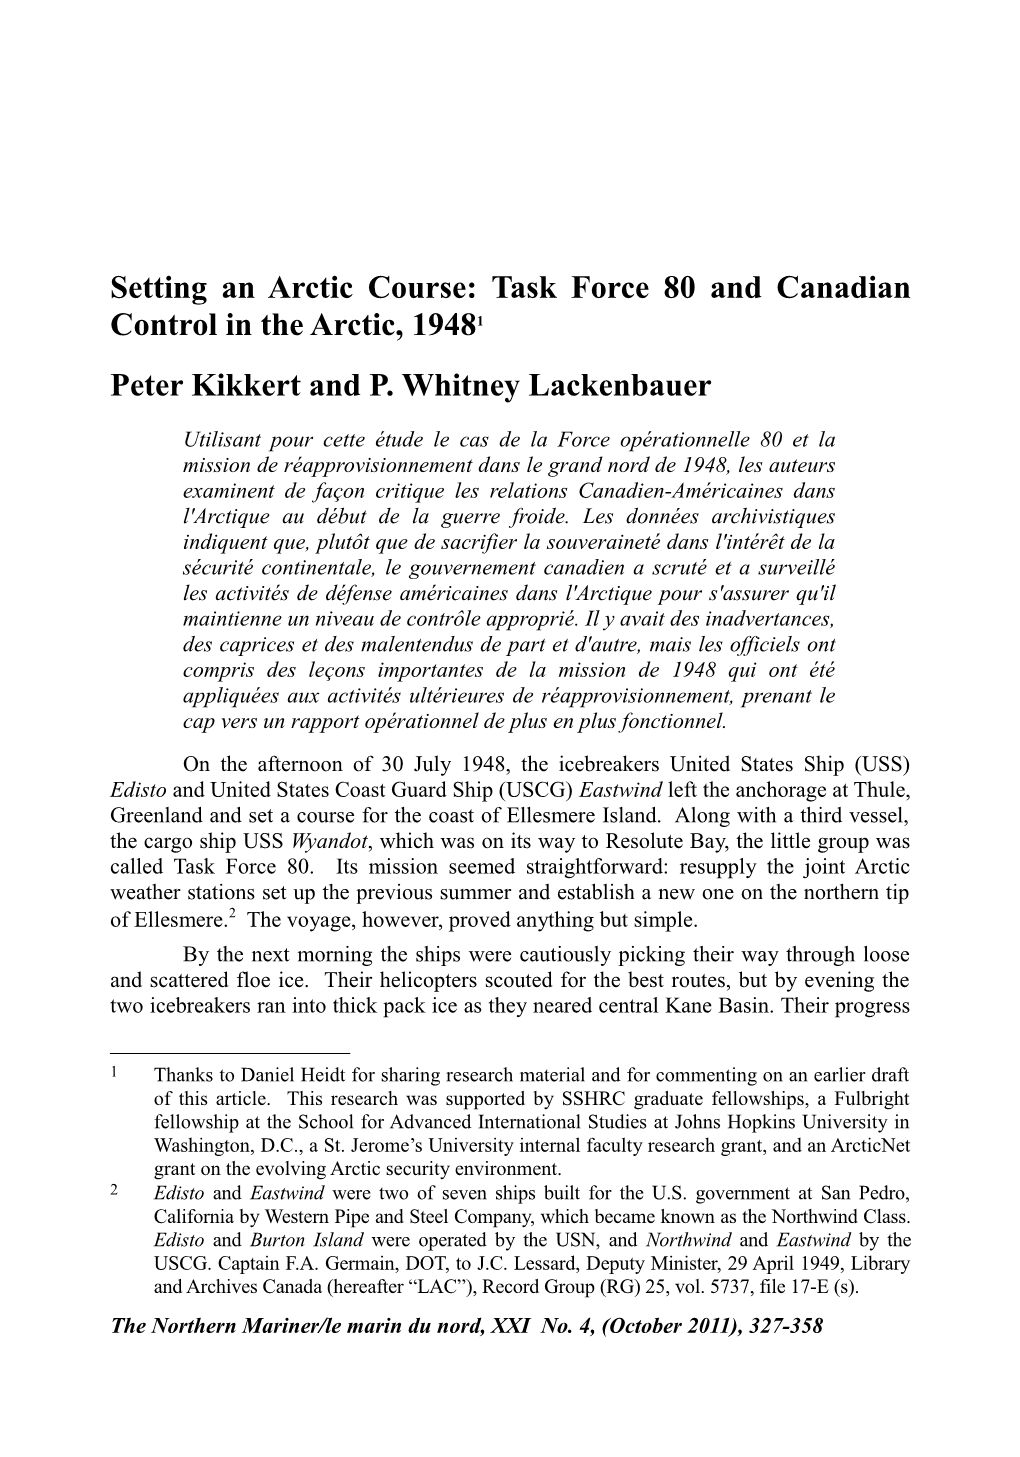 Setting an Arctic Course: Task Force 80 and Canadian Control in the Arctic, 19481 Peter Kikkert and P